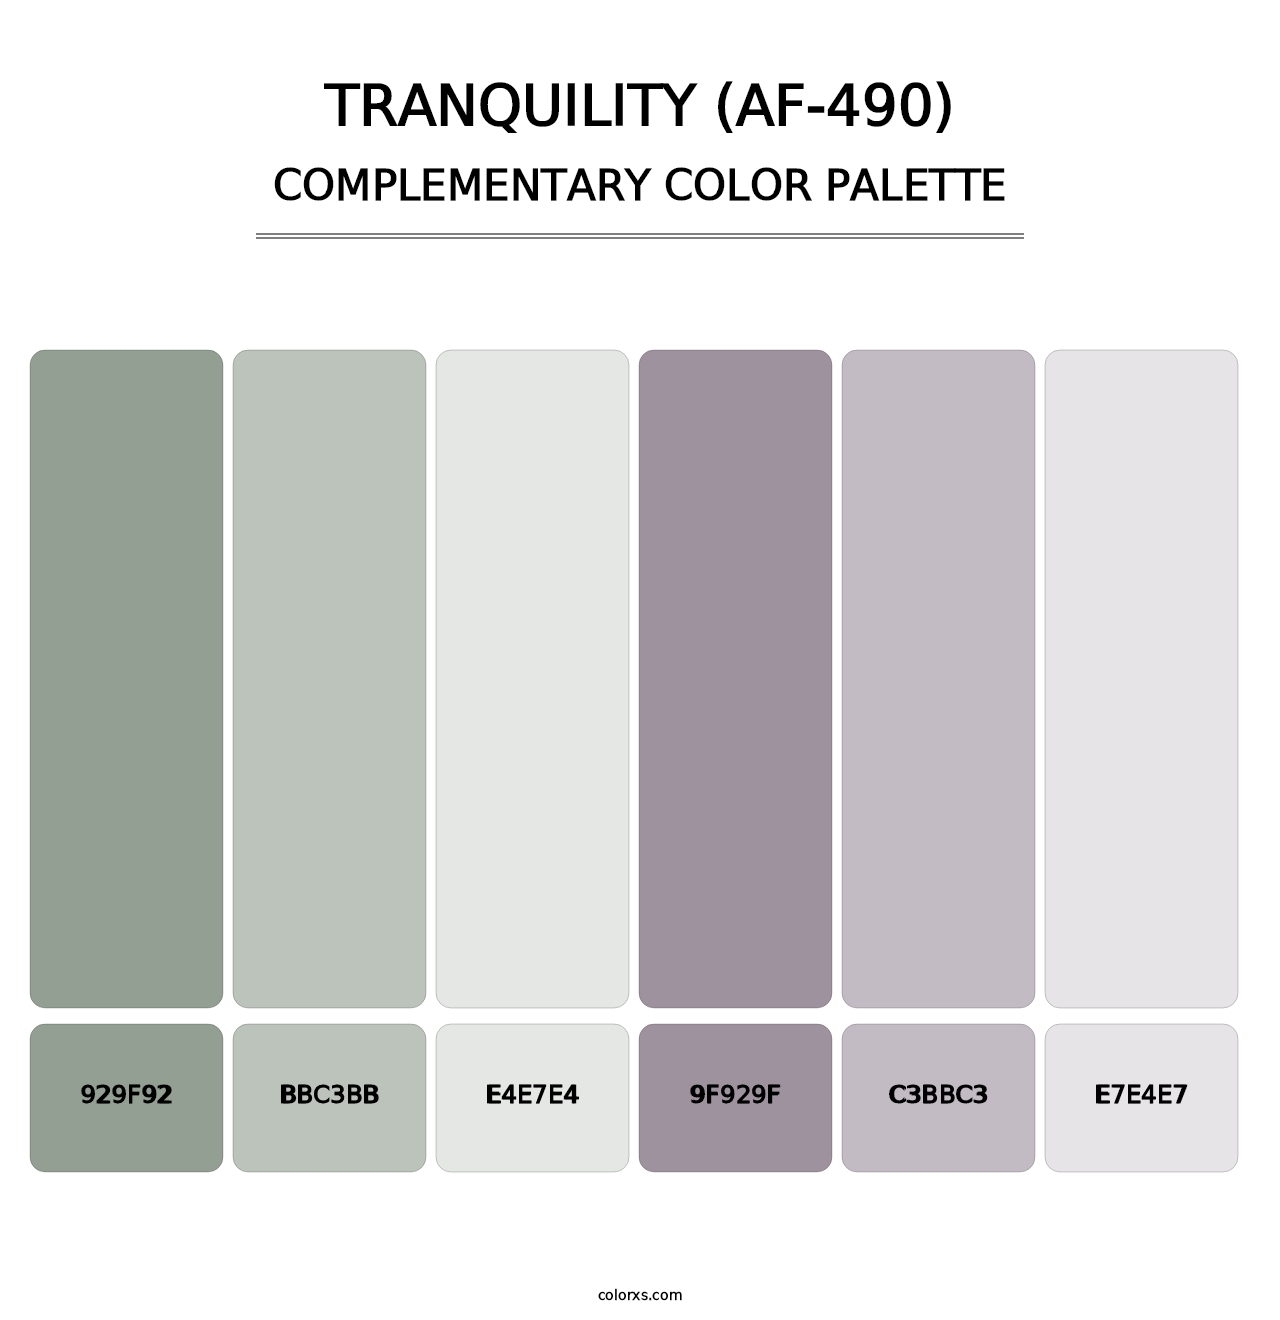 Tranquility (AF-490) - Complementary Color Palette